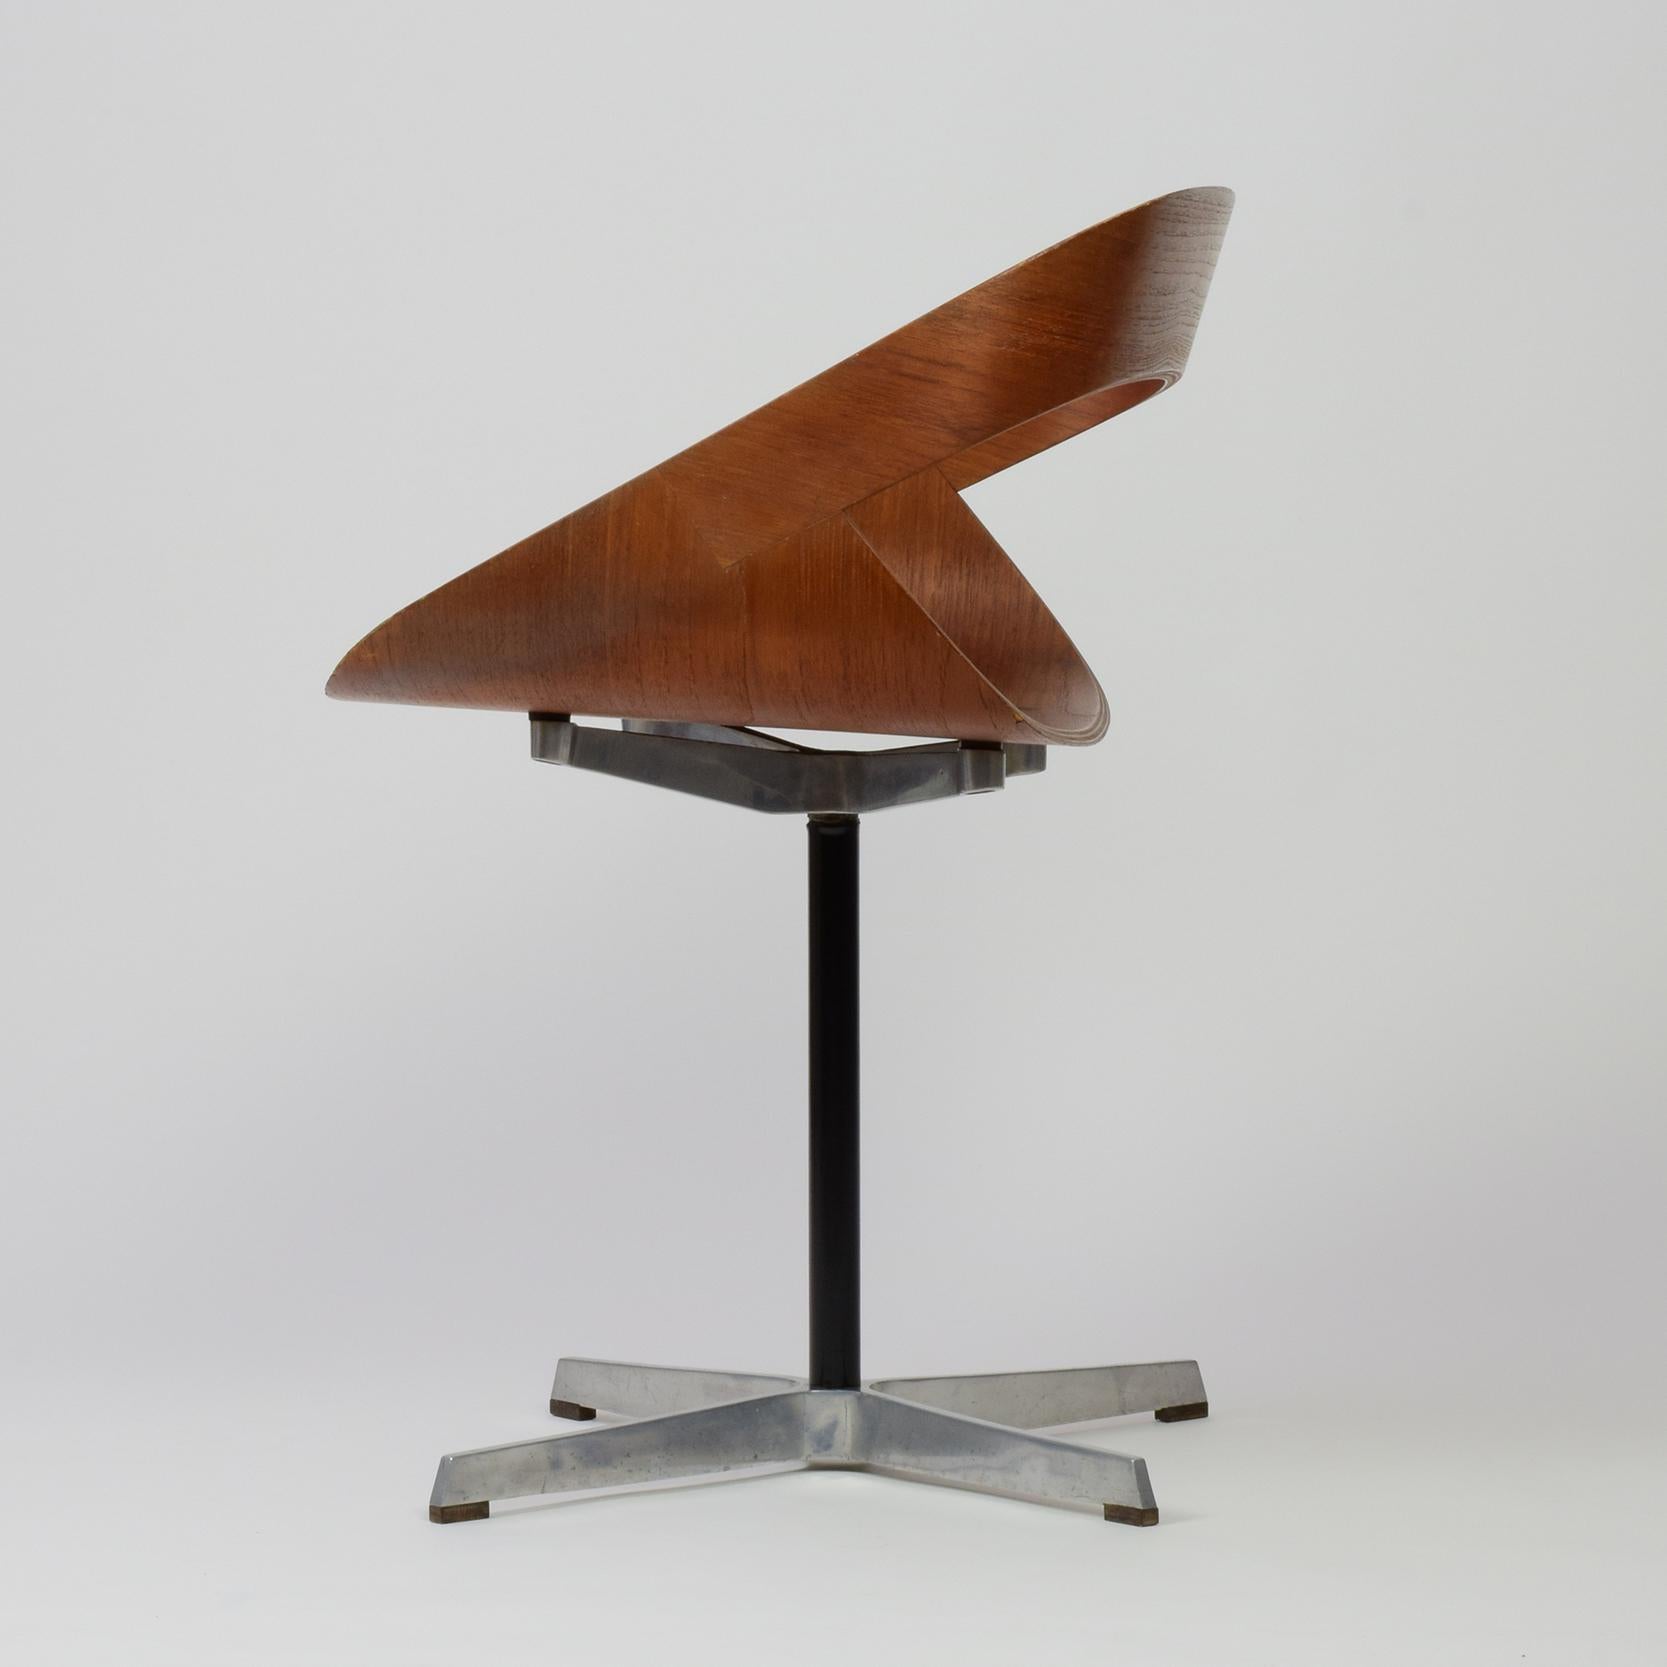 Geoffrey Harcourt, Chair 130, 'RCA' Chair, Designed 1960, Produced by Artifort For Sale 1